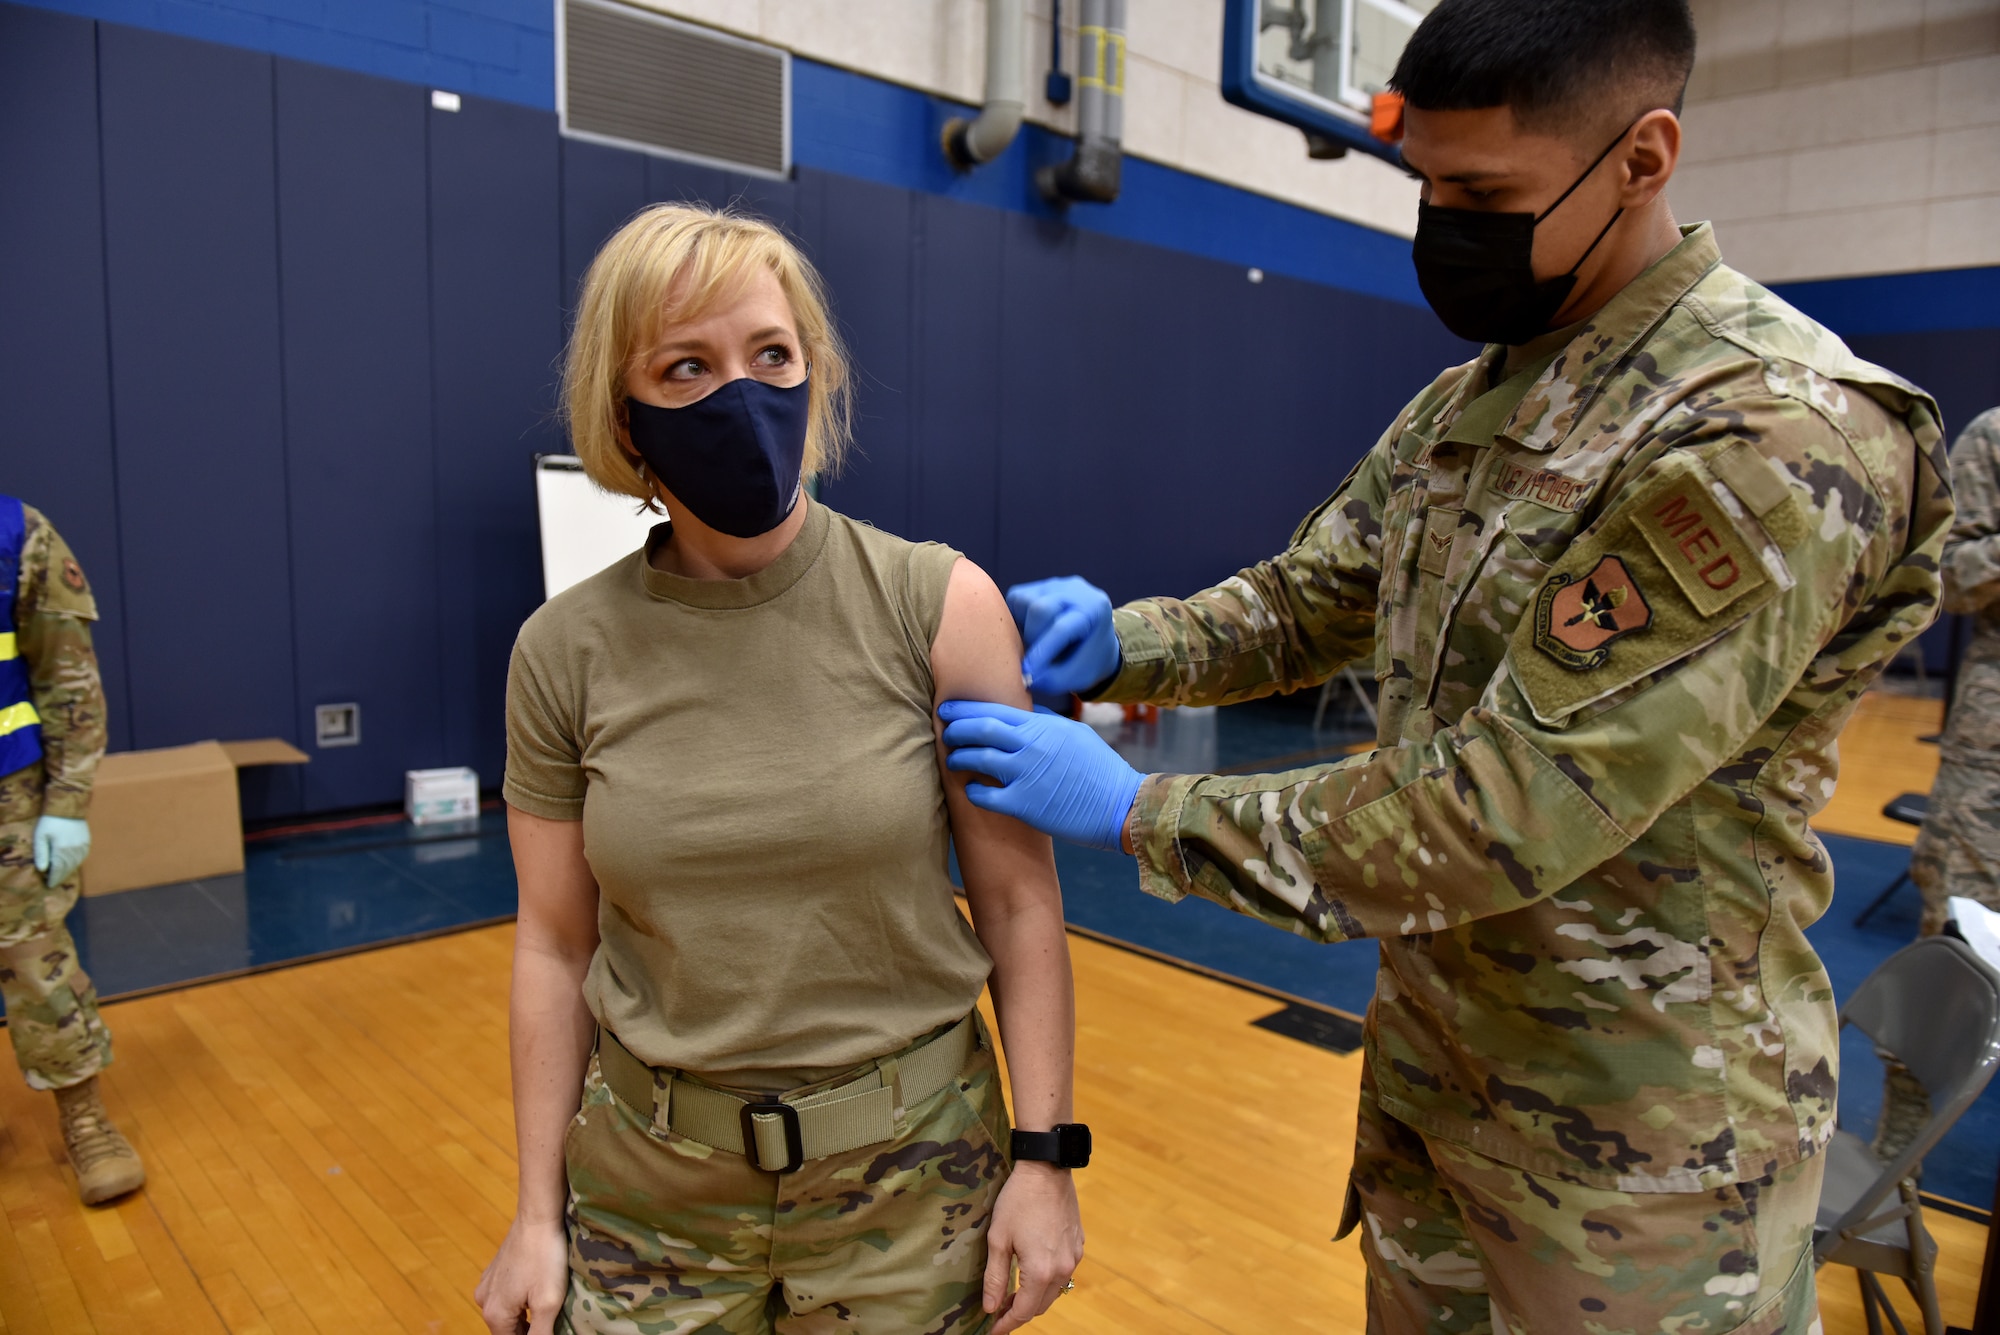 U.S. Air Force Chief Master Sgt. Casy Boomershine, 17th Training Wing command chief, watches as Airman 1st Class Benjamin Loera, 17th Operational Medical Readiness Squadron medical technician for active duty, prepares her arm for the COIVD-19 vaccine at the Mathis Fitness Center on Goodfellow Air Force Base, Texas, Jan. 22, 2021. On Jan. 20, Team Goodfellow vaccinated its frontline and mission essential positions and those who are considered high risk first, in accordance with the Department of the Air Forces distribution plan. (U.S. Air Force photo by Staff Sgt. Seraiah Wolf)